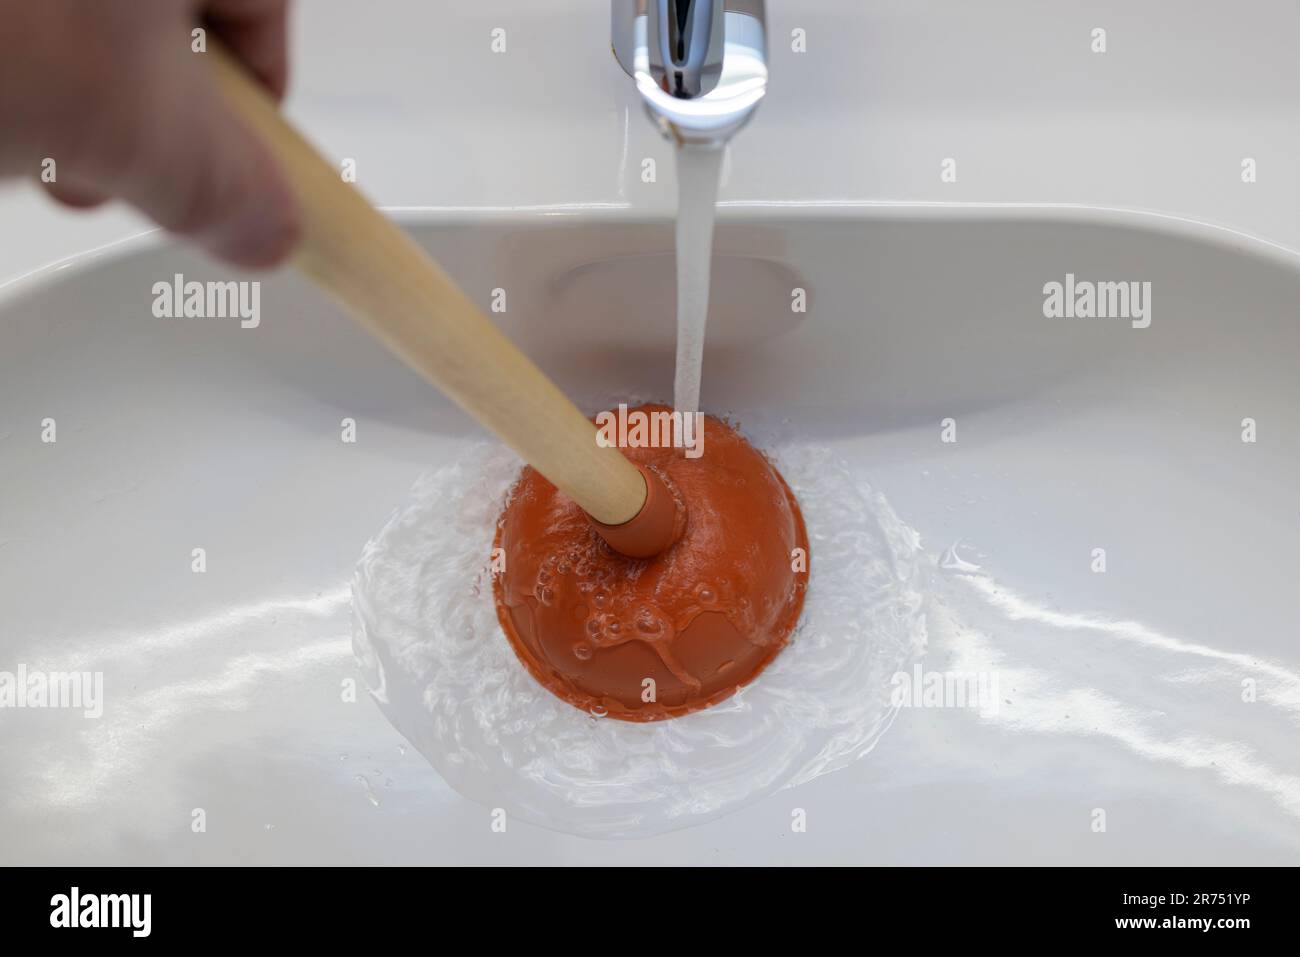 Sink, Clogged drain, unclog with the plunger, Stock Photo